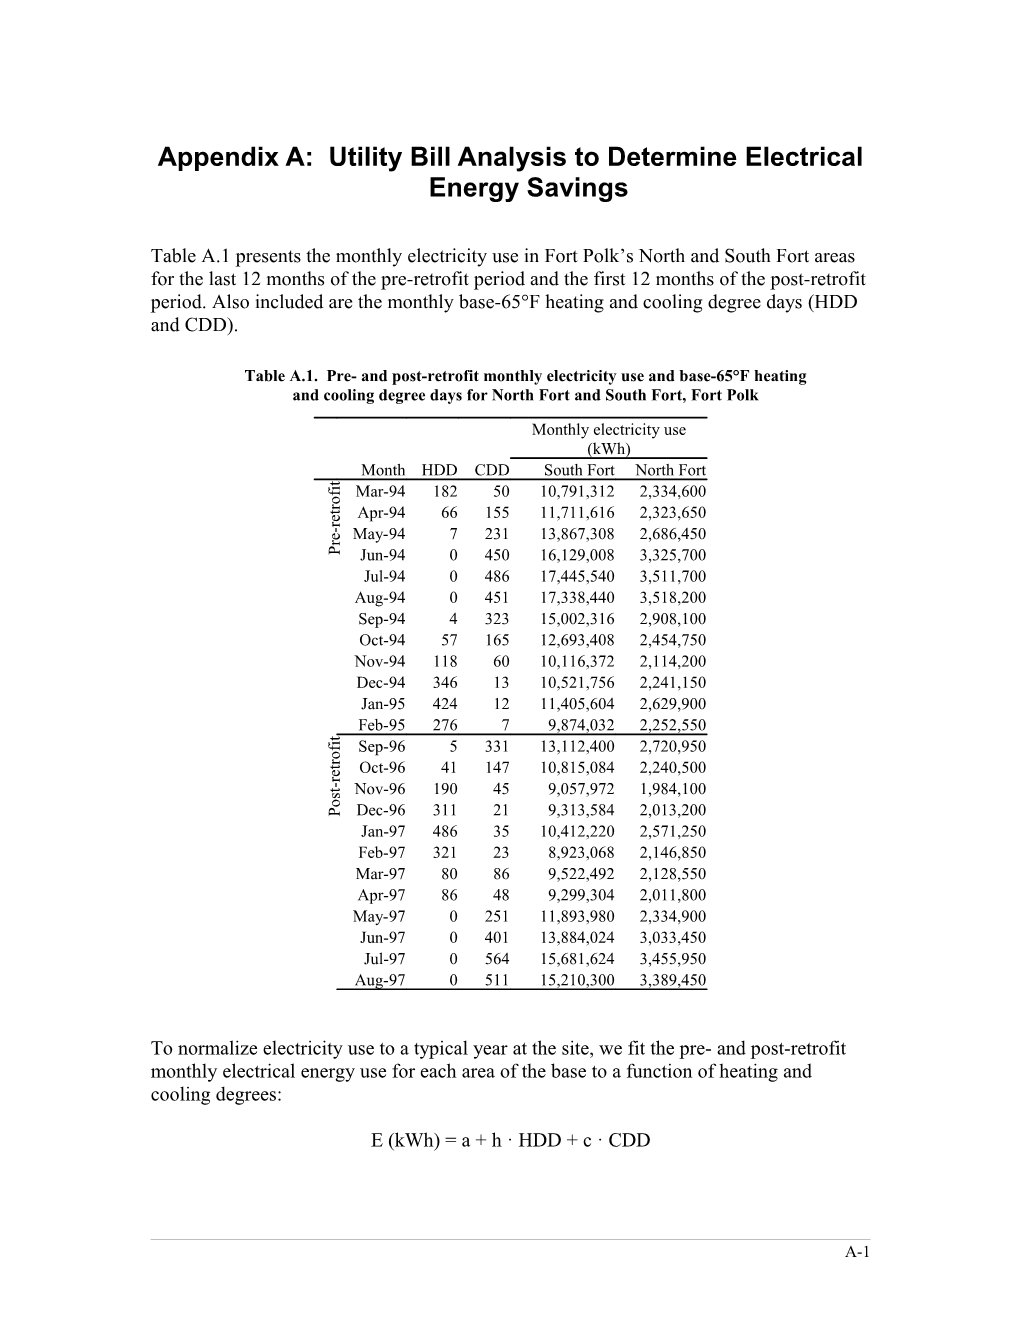 Appendix A: Utility Bill Analysis to Determine Electrical Energy Savings